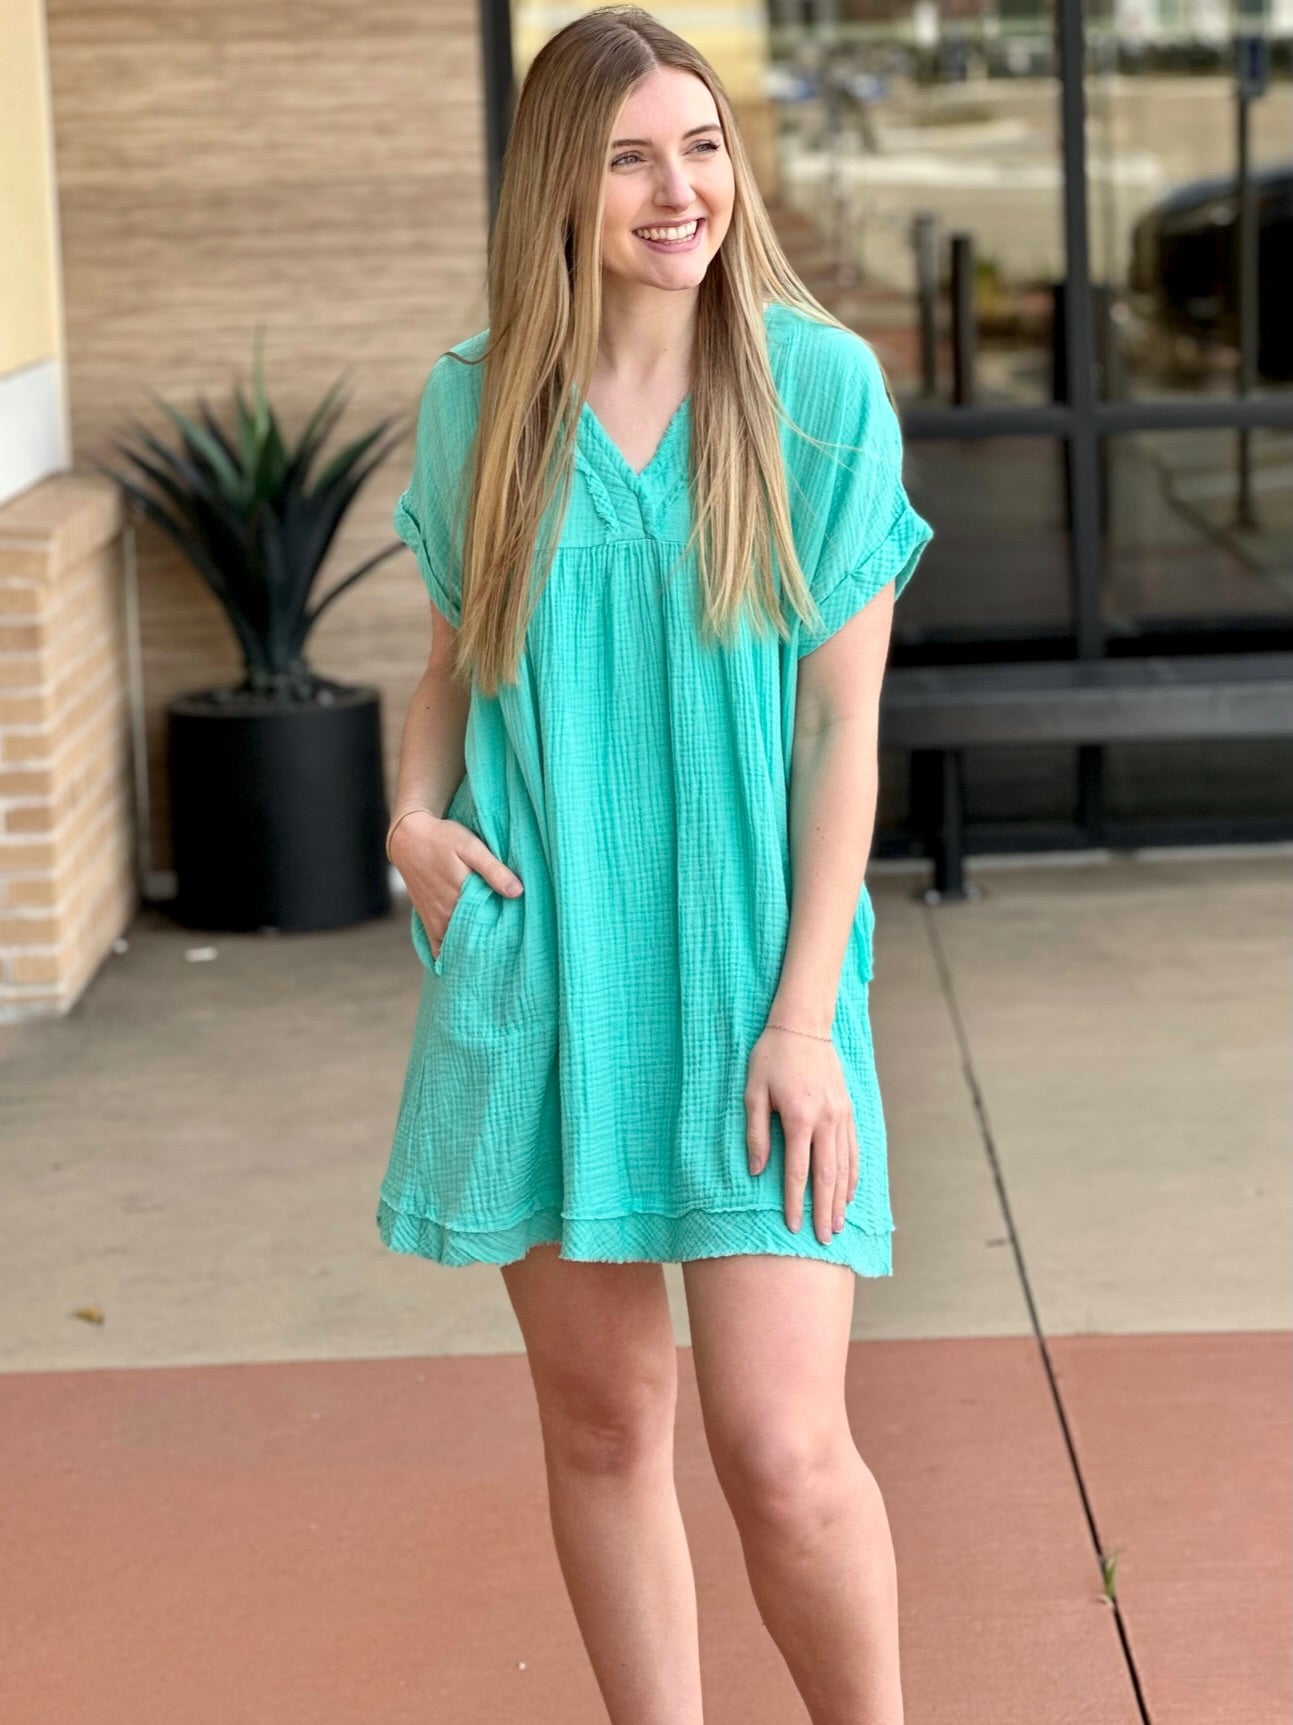 Lexi in mint dress front view looking to the side